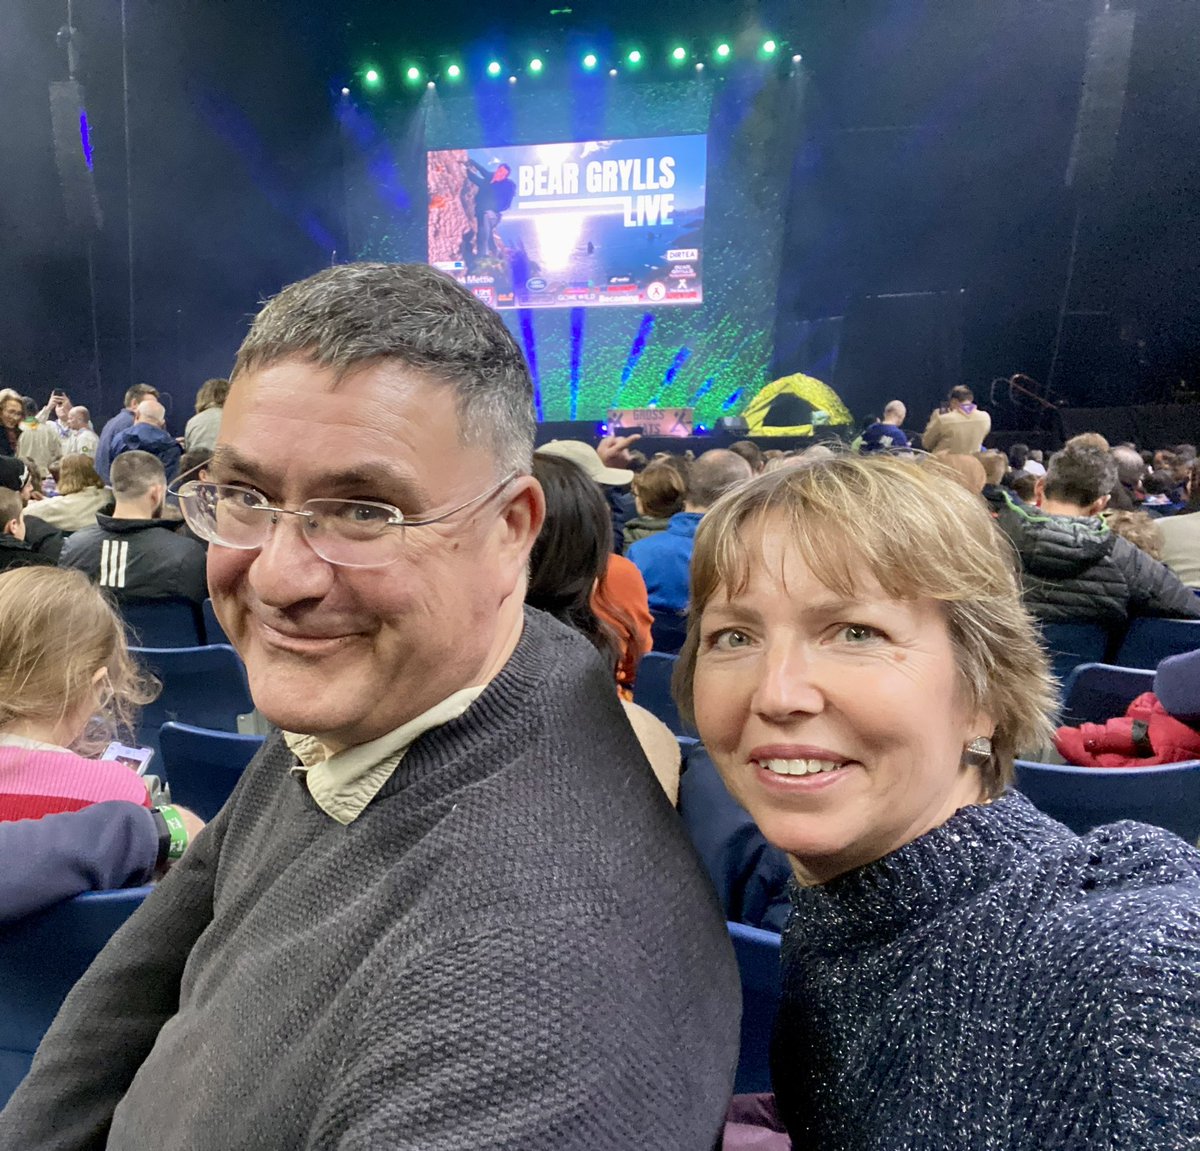 At @OVOArena with @DawnAdelaide waiting for Chief Scout @BearGrylls to start his show - There are a fair few @scouts in the audience!